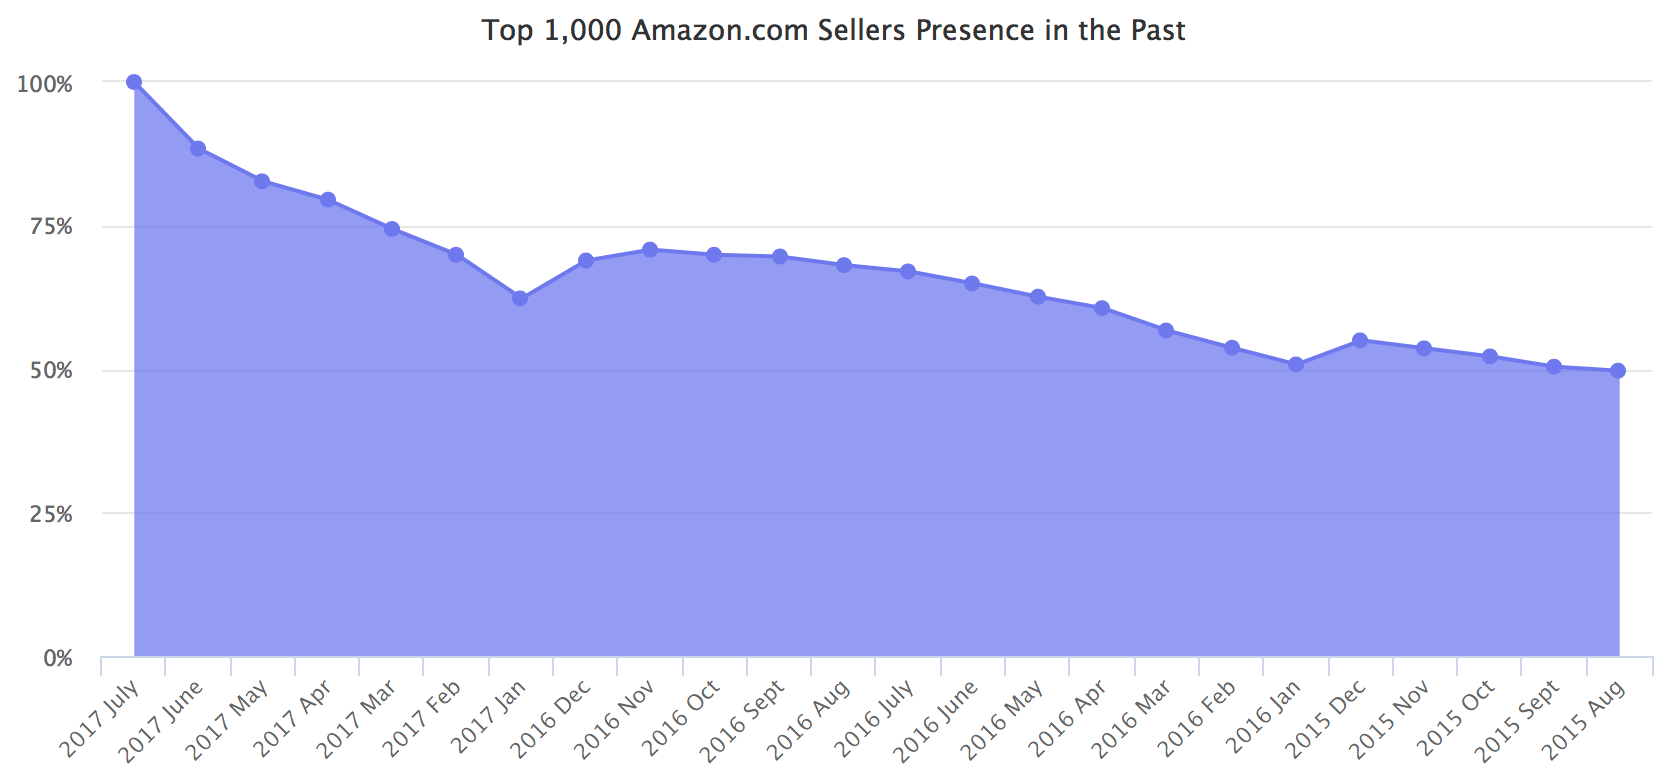 Top 1,000 Amazon.com Sellers Presence in the Past